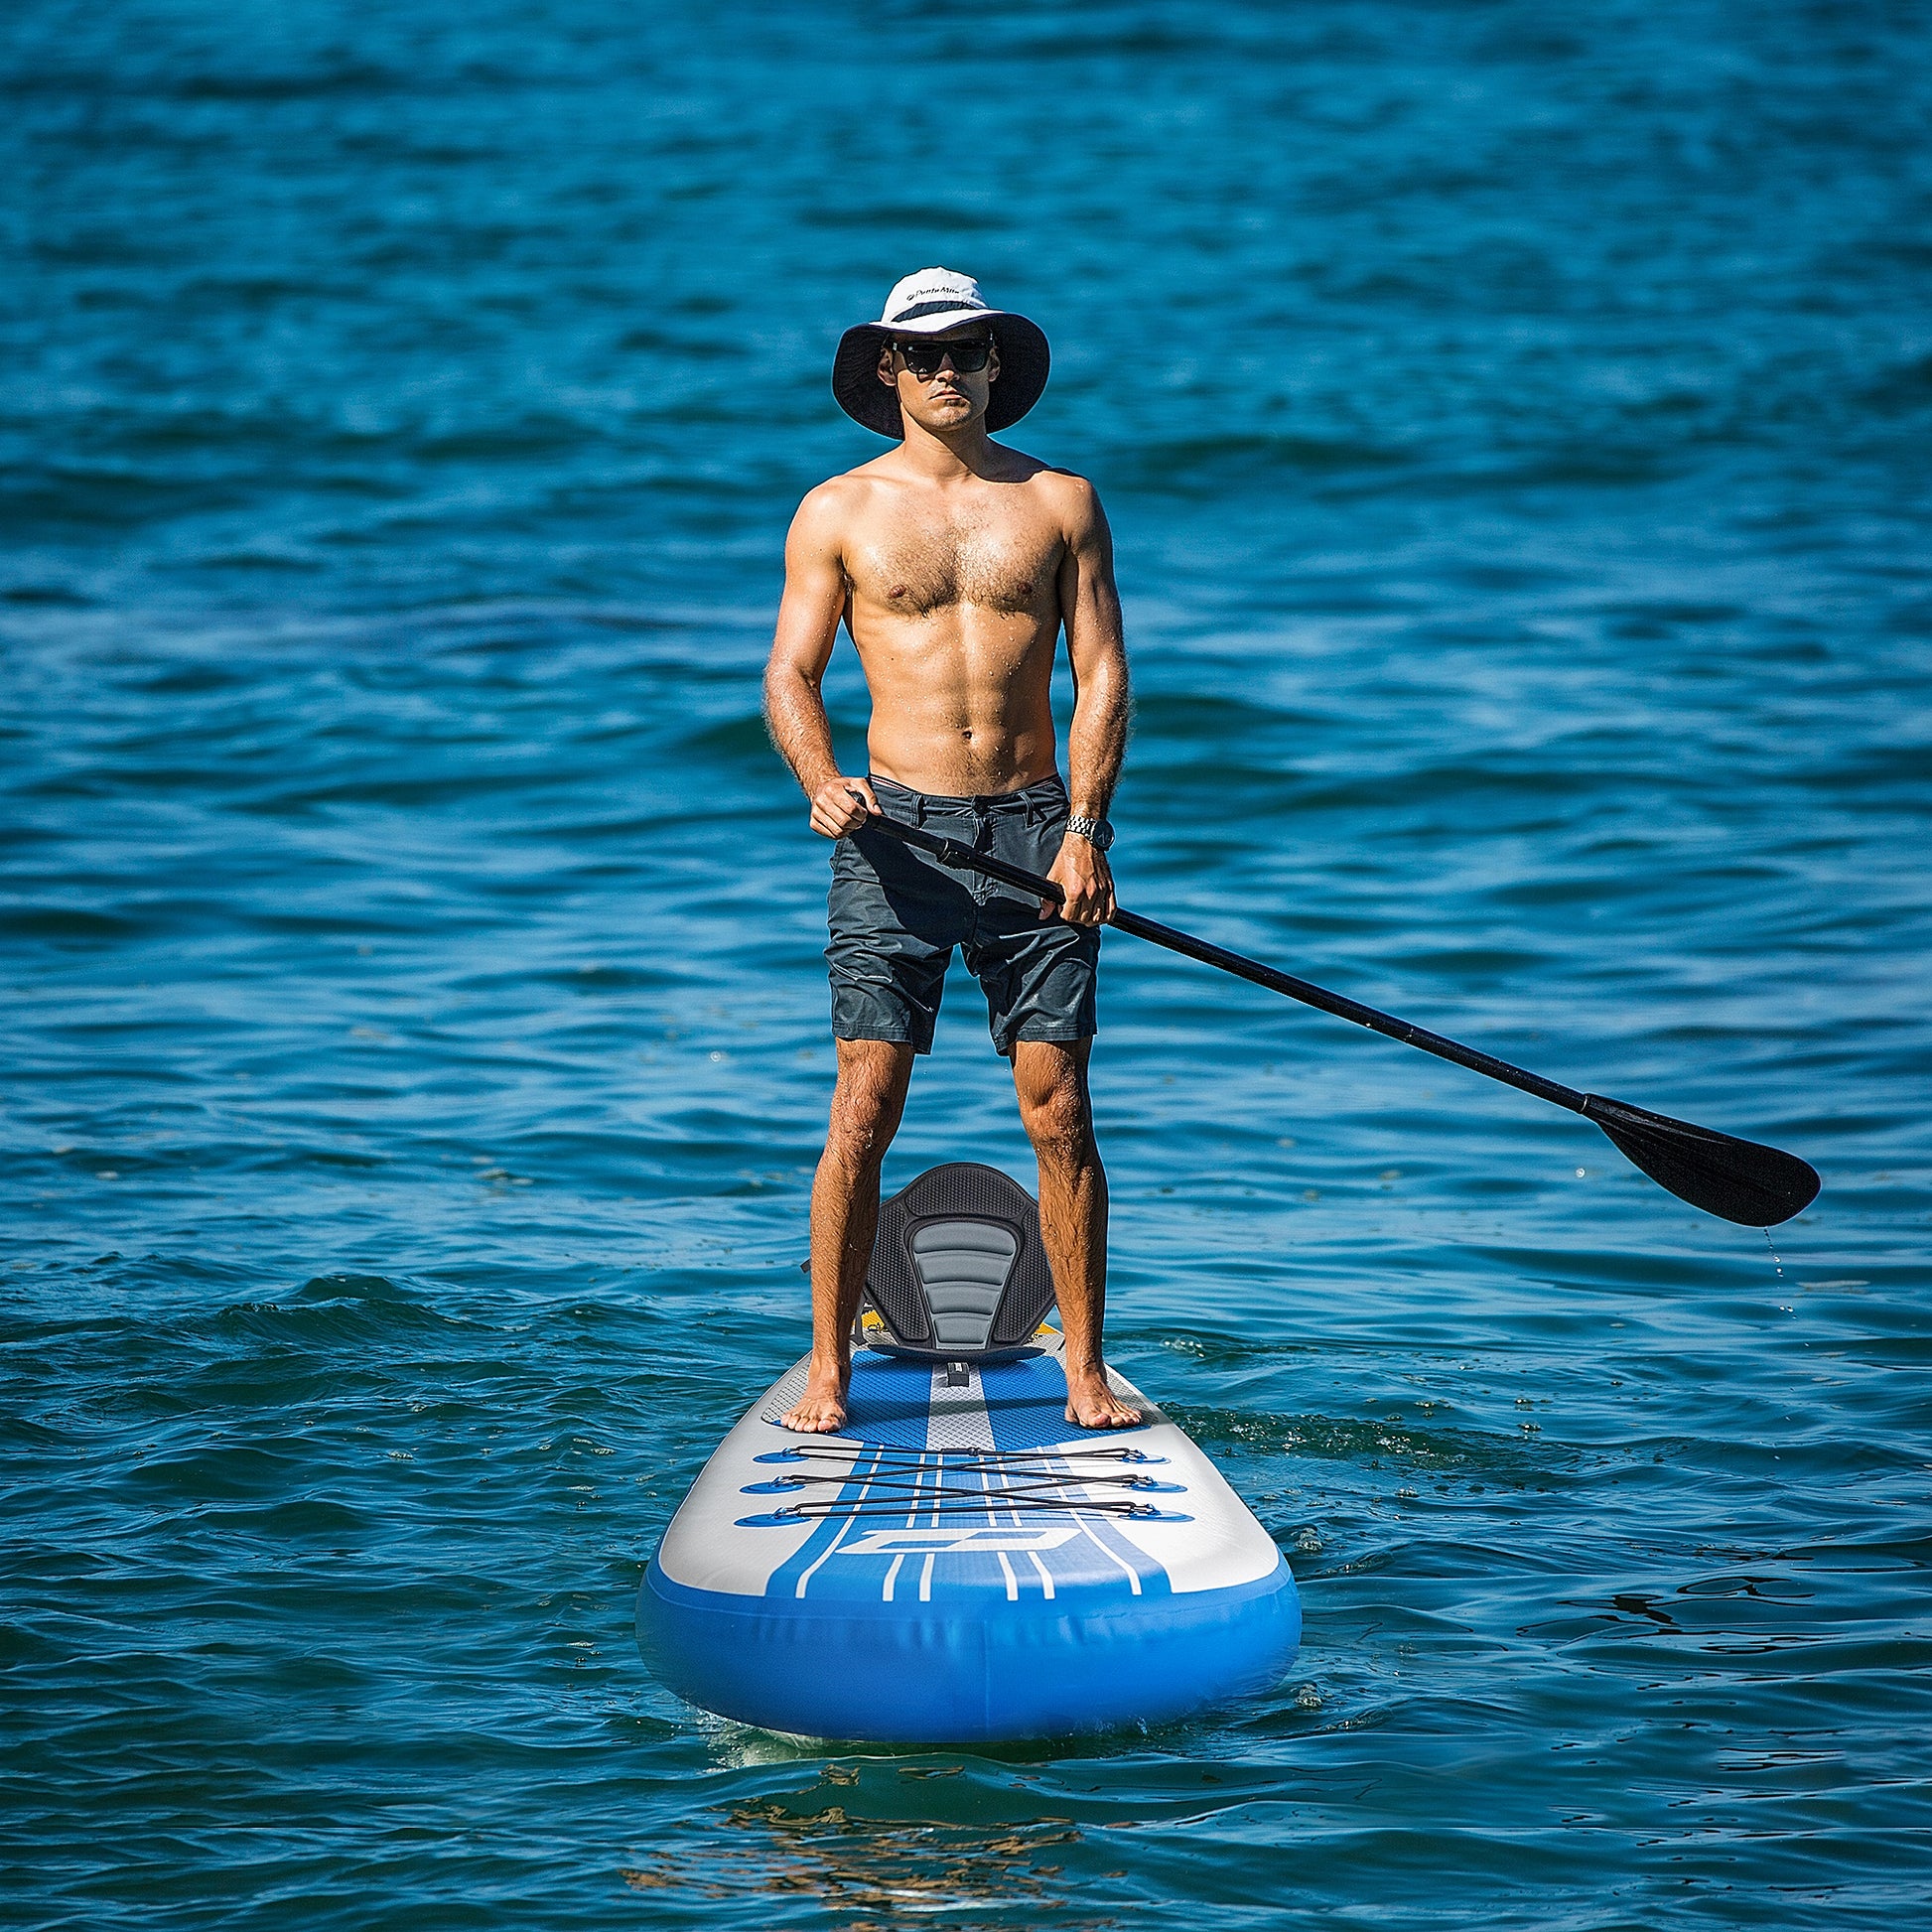 inQracer 11' 10'6" Inflatable Stand Up Paddle